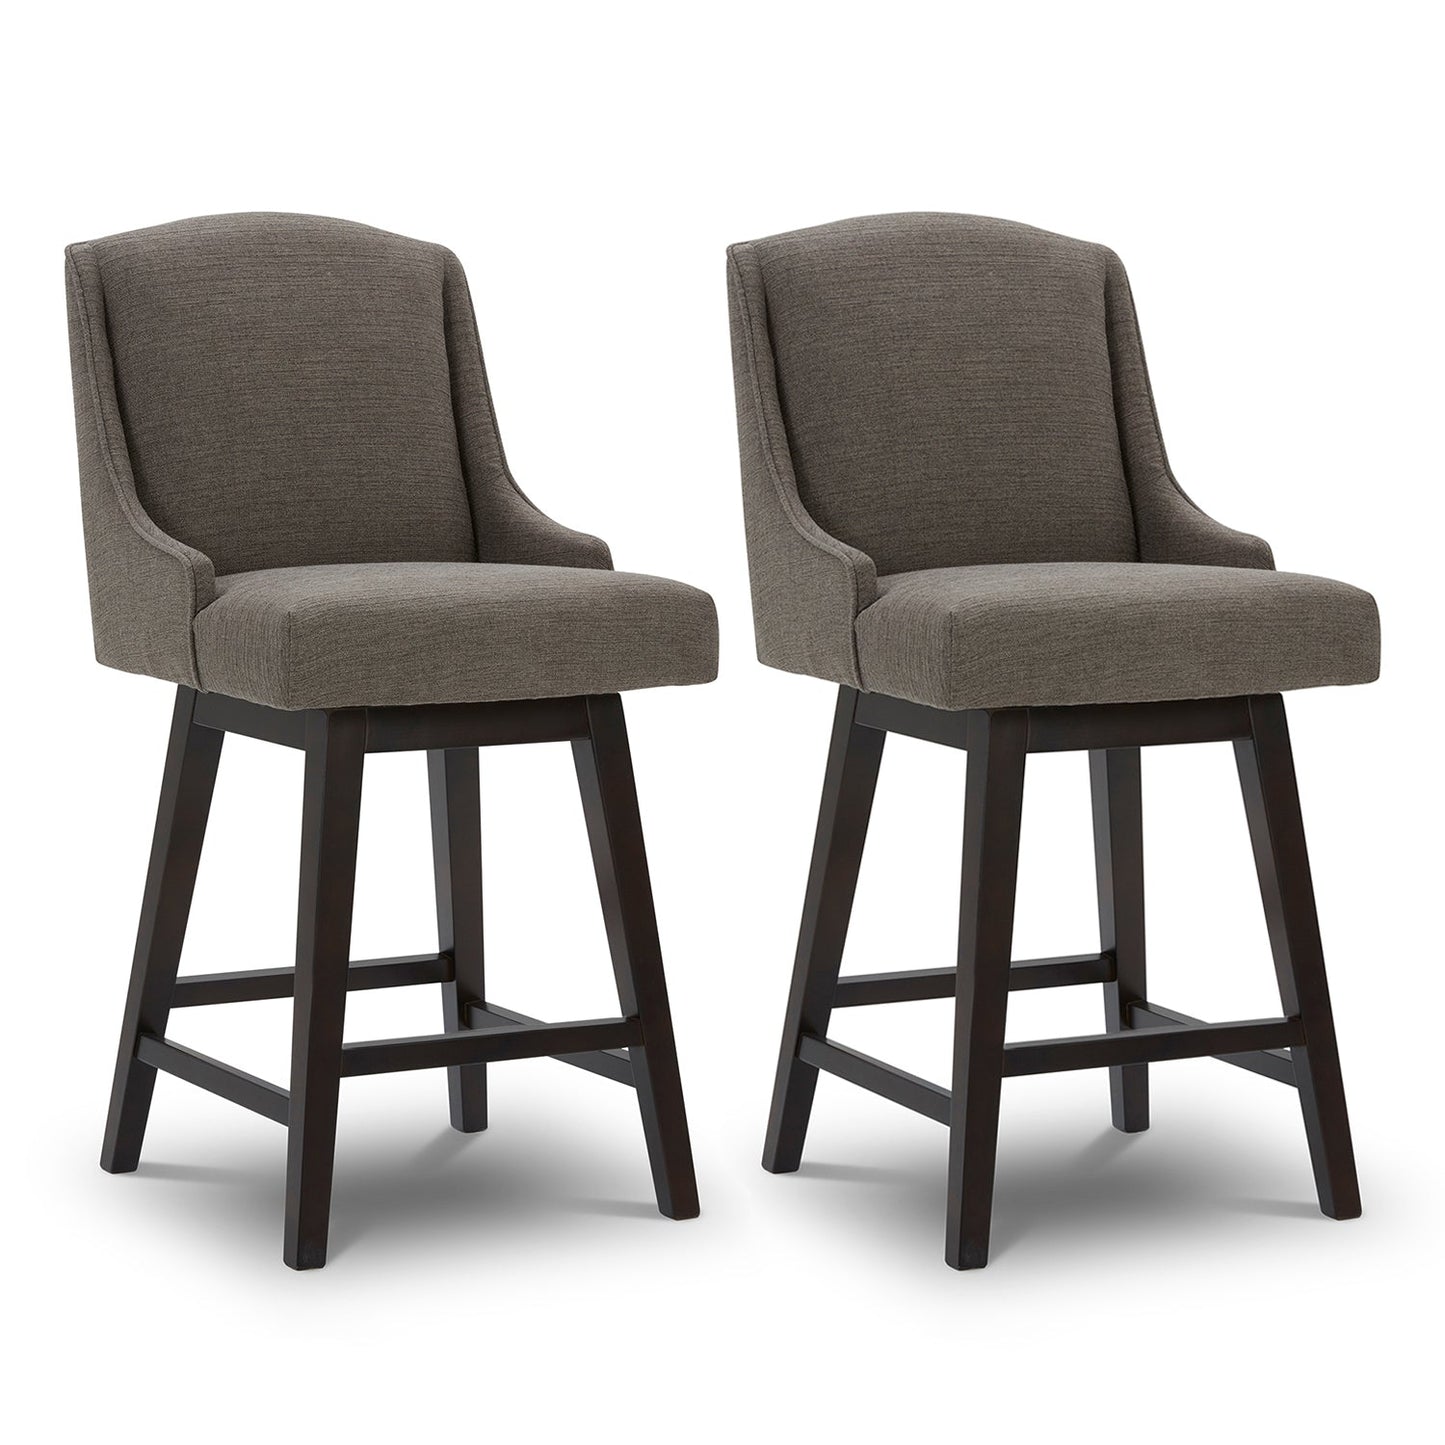 CHITA LIVING-Ryker Transitional Swivel Counter Stool - Fabric & Leather-Counter Stools-Performance Fabric-Charcoal-2 Pack